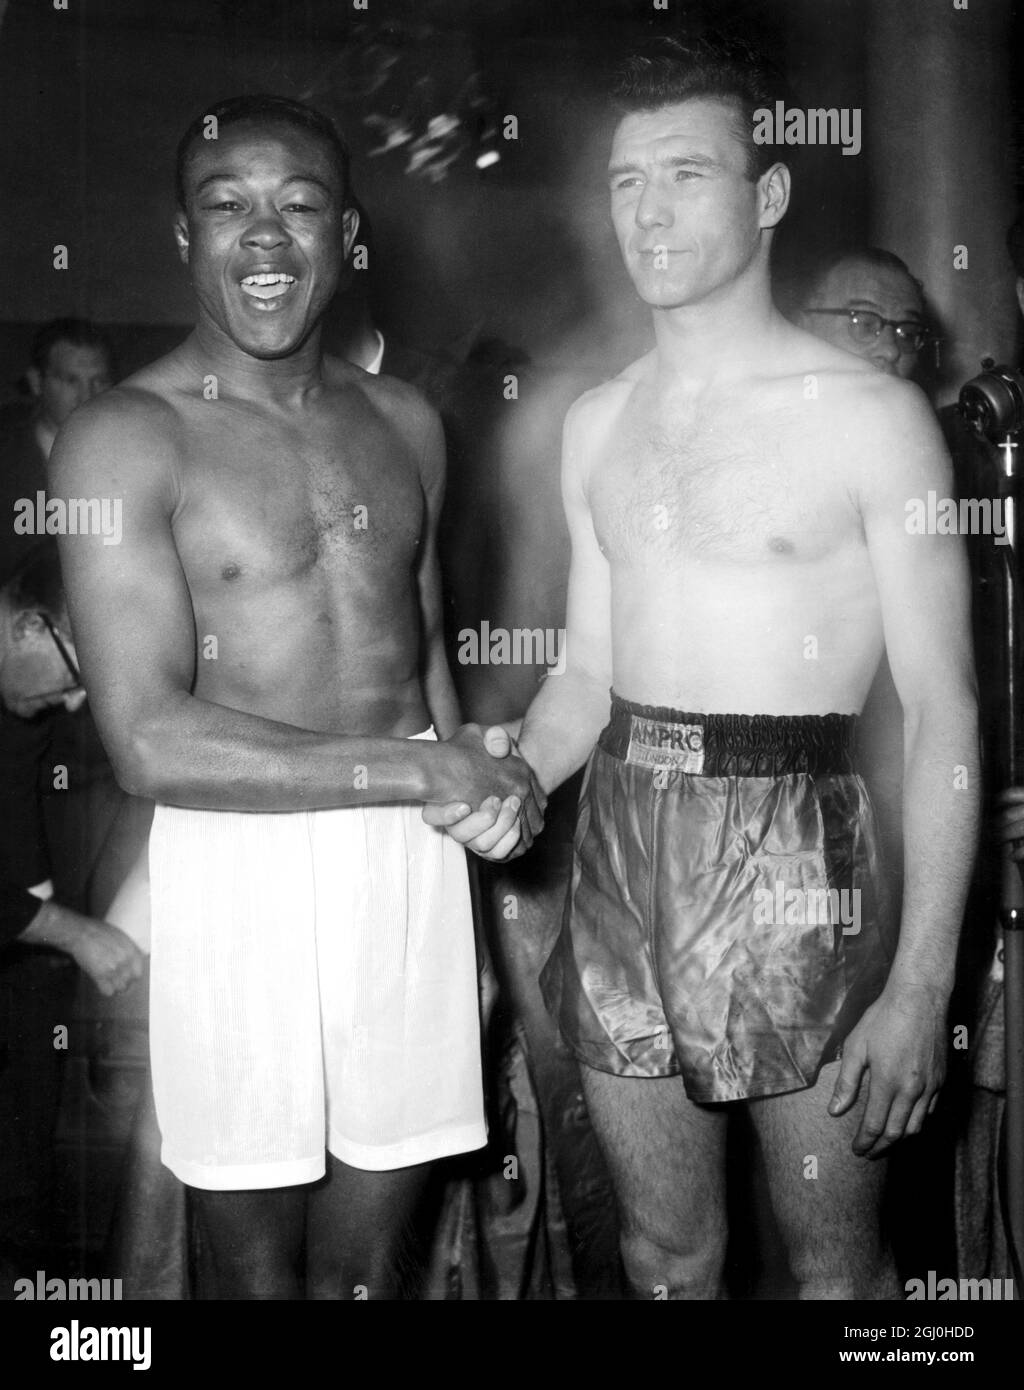 Peter Waterman, the undefeated London welterweight (right) shakes hands  with ""The Cuban Hawk"", Kid Gavilan, former World Welterweight champion  after their weigh-in at Jack Solomon's gym. They meet in an international  contest